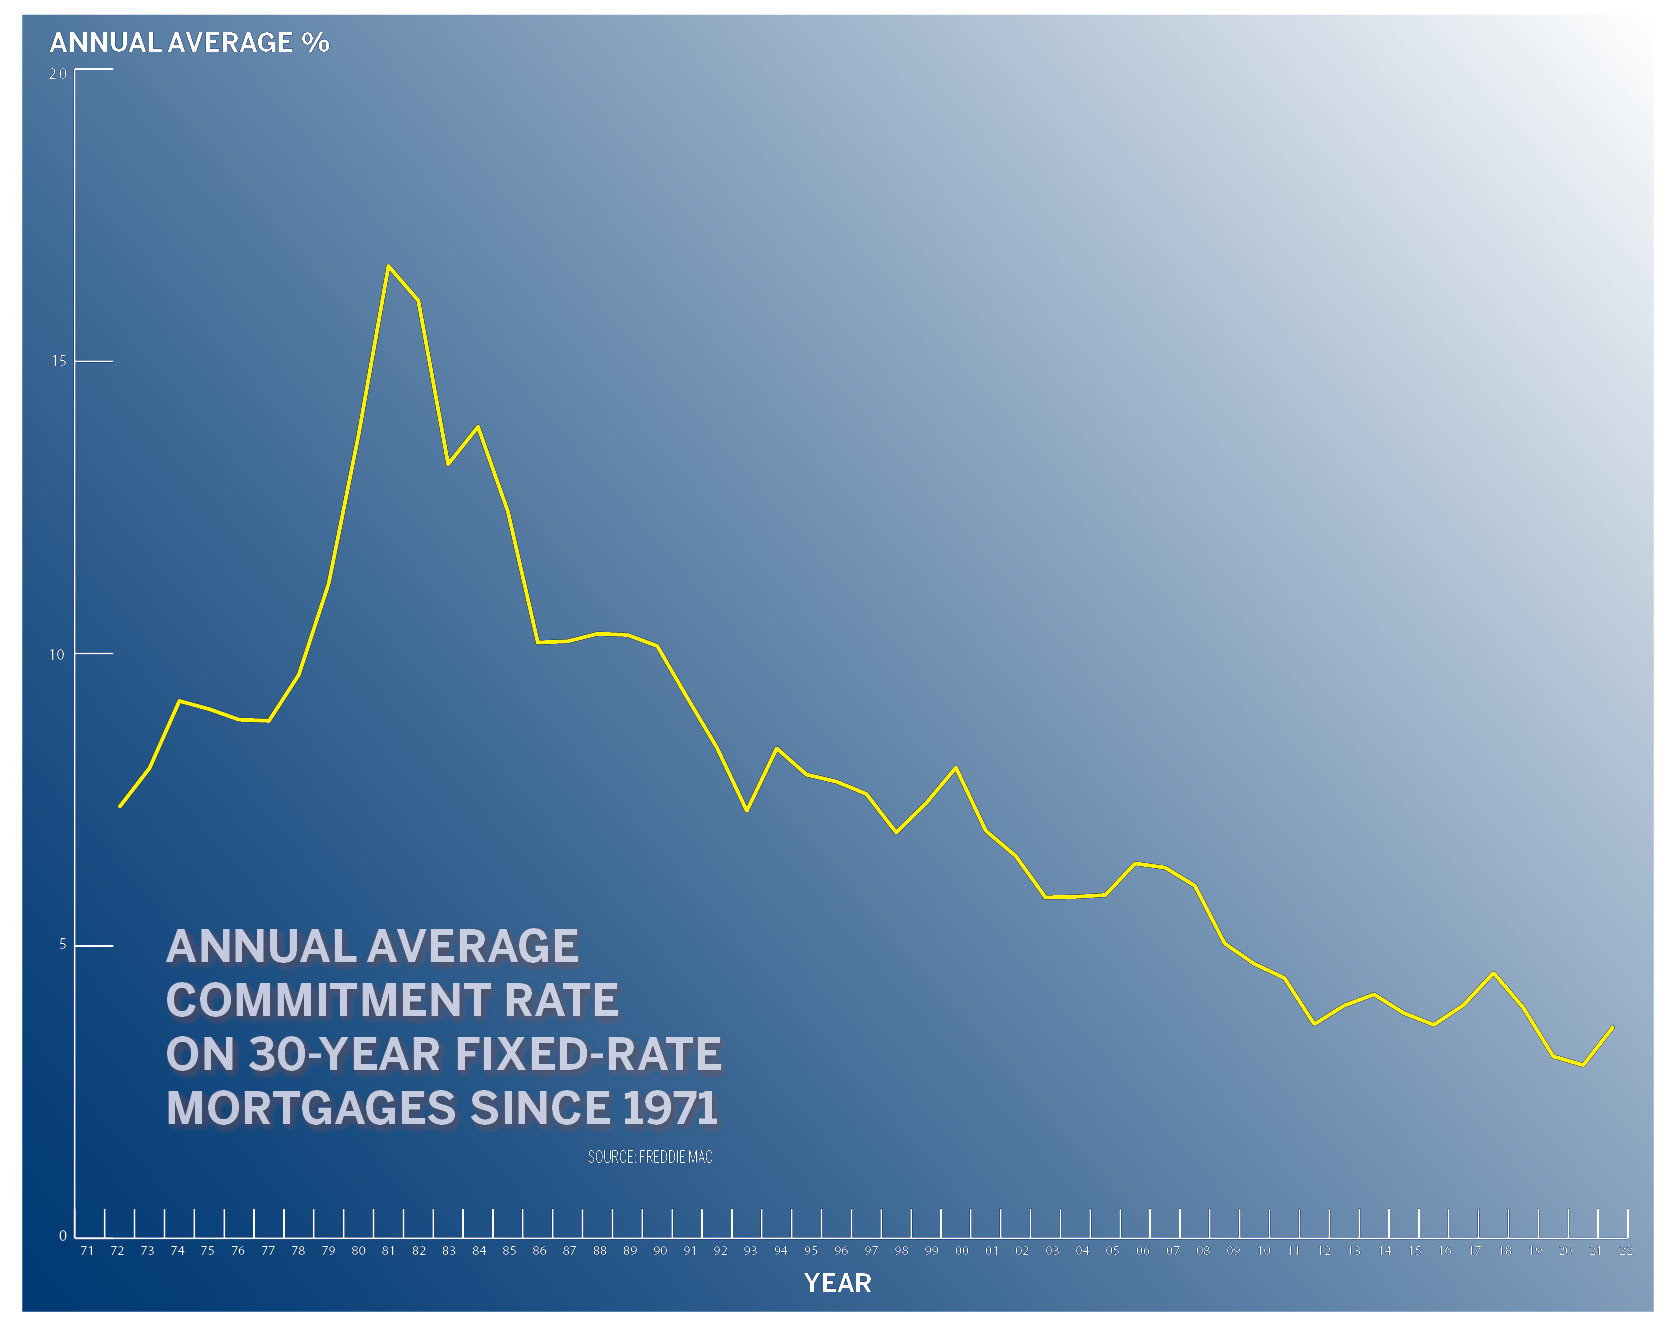 Average annual commitment rate on a 30-year fixed-rate mortgage from 1971 to 2022.